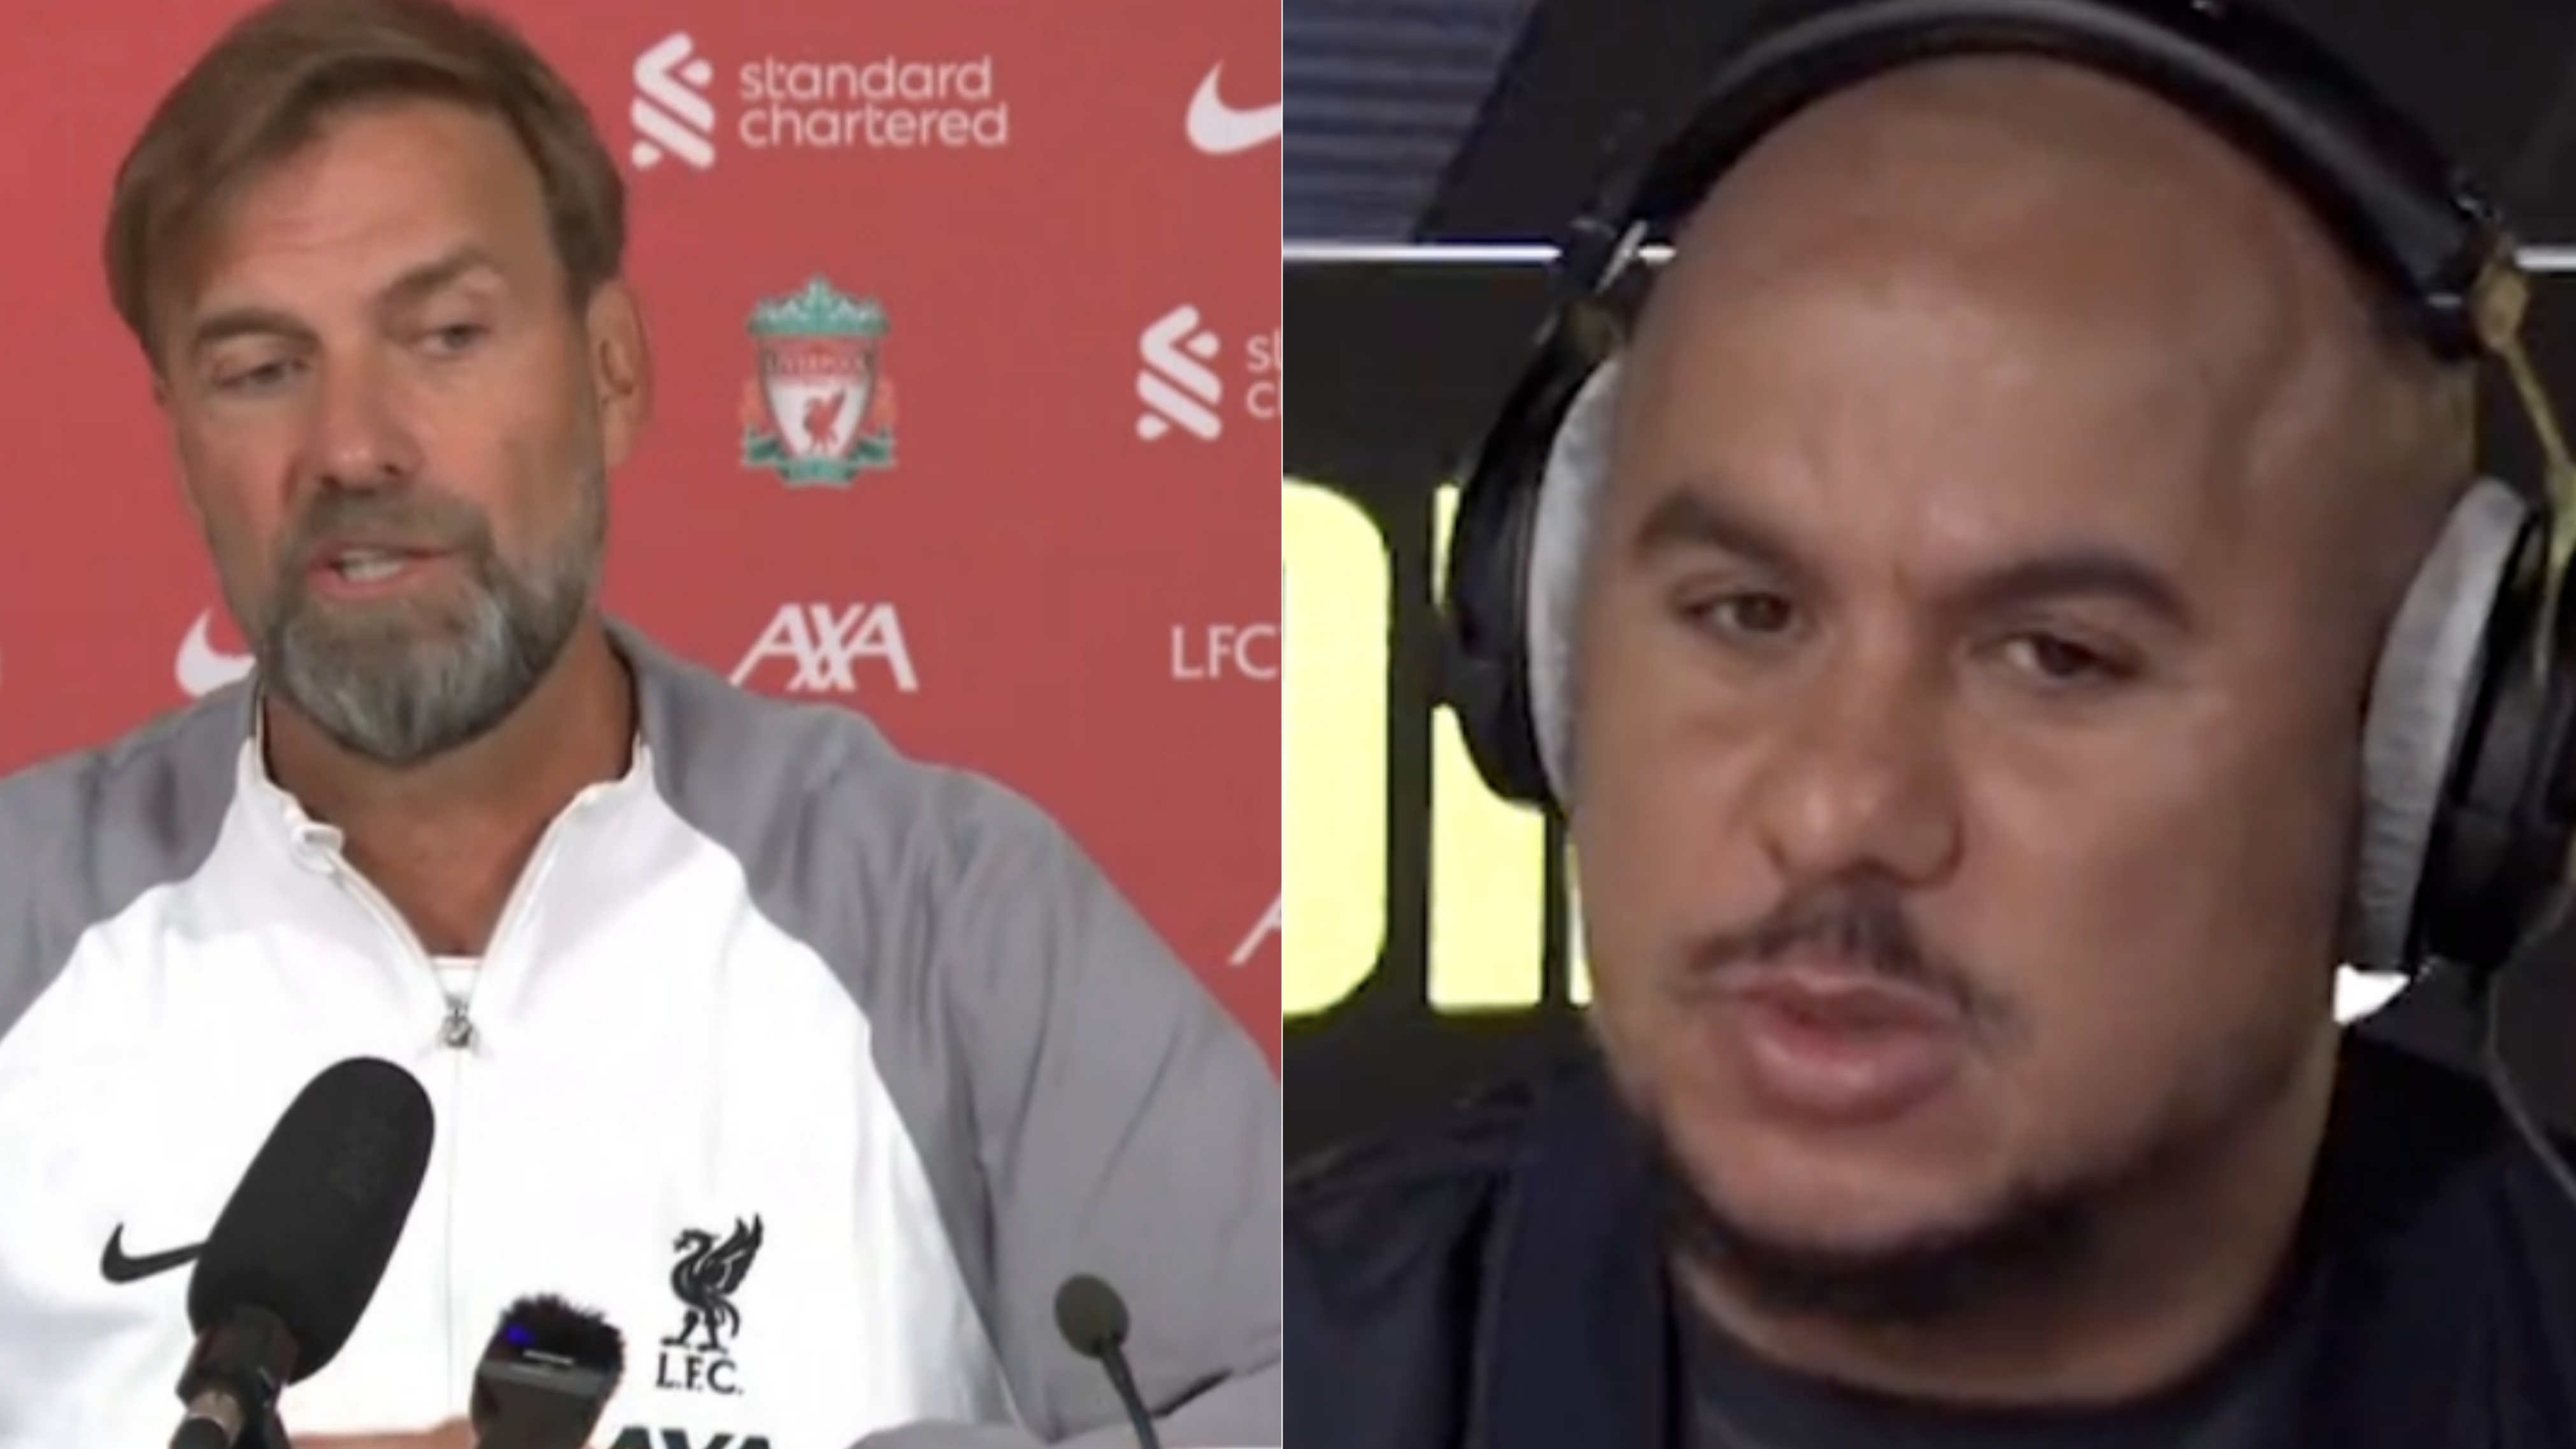 Jurgen Klopp response to Agbonlahor's comments about Man United.